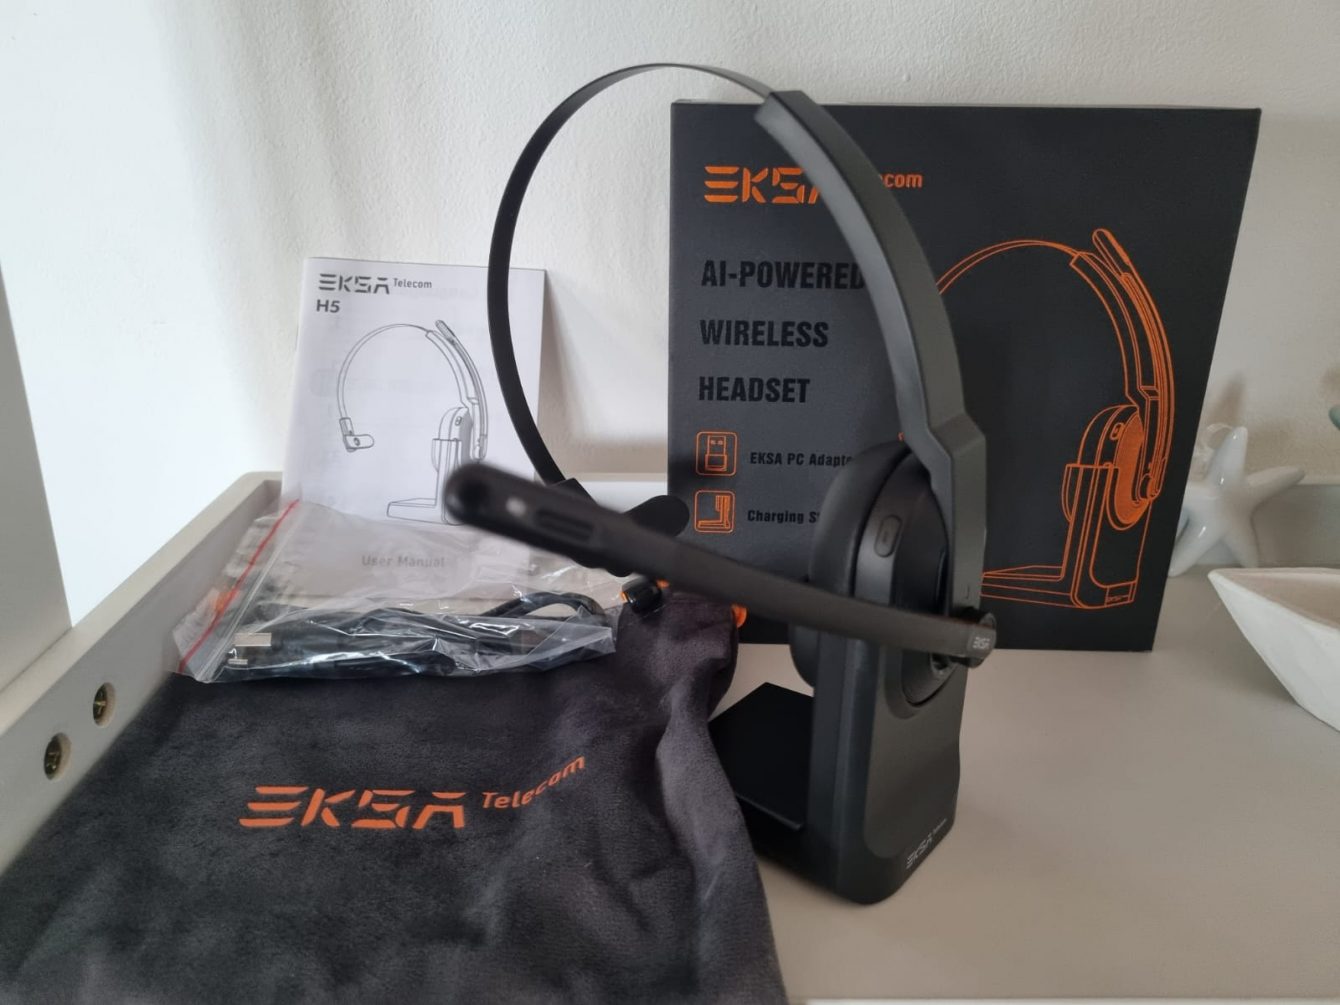 EKSA H5 review: the new Bluetooth headphones for work